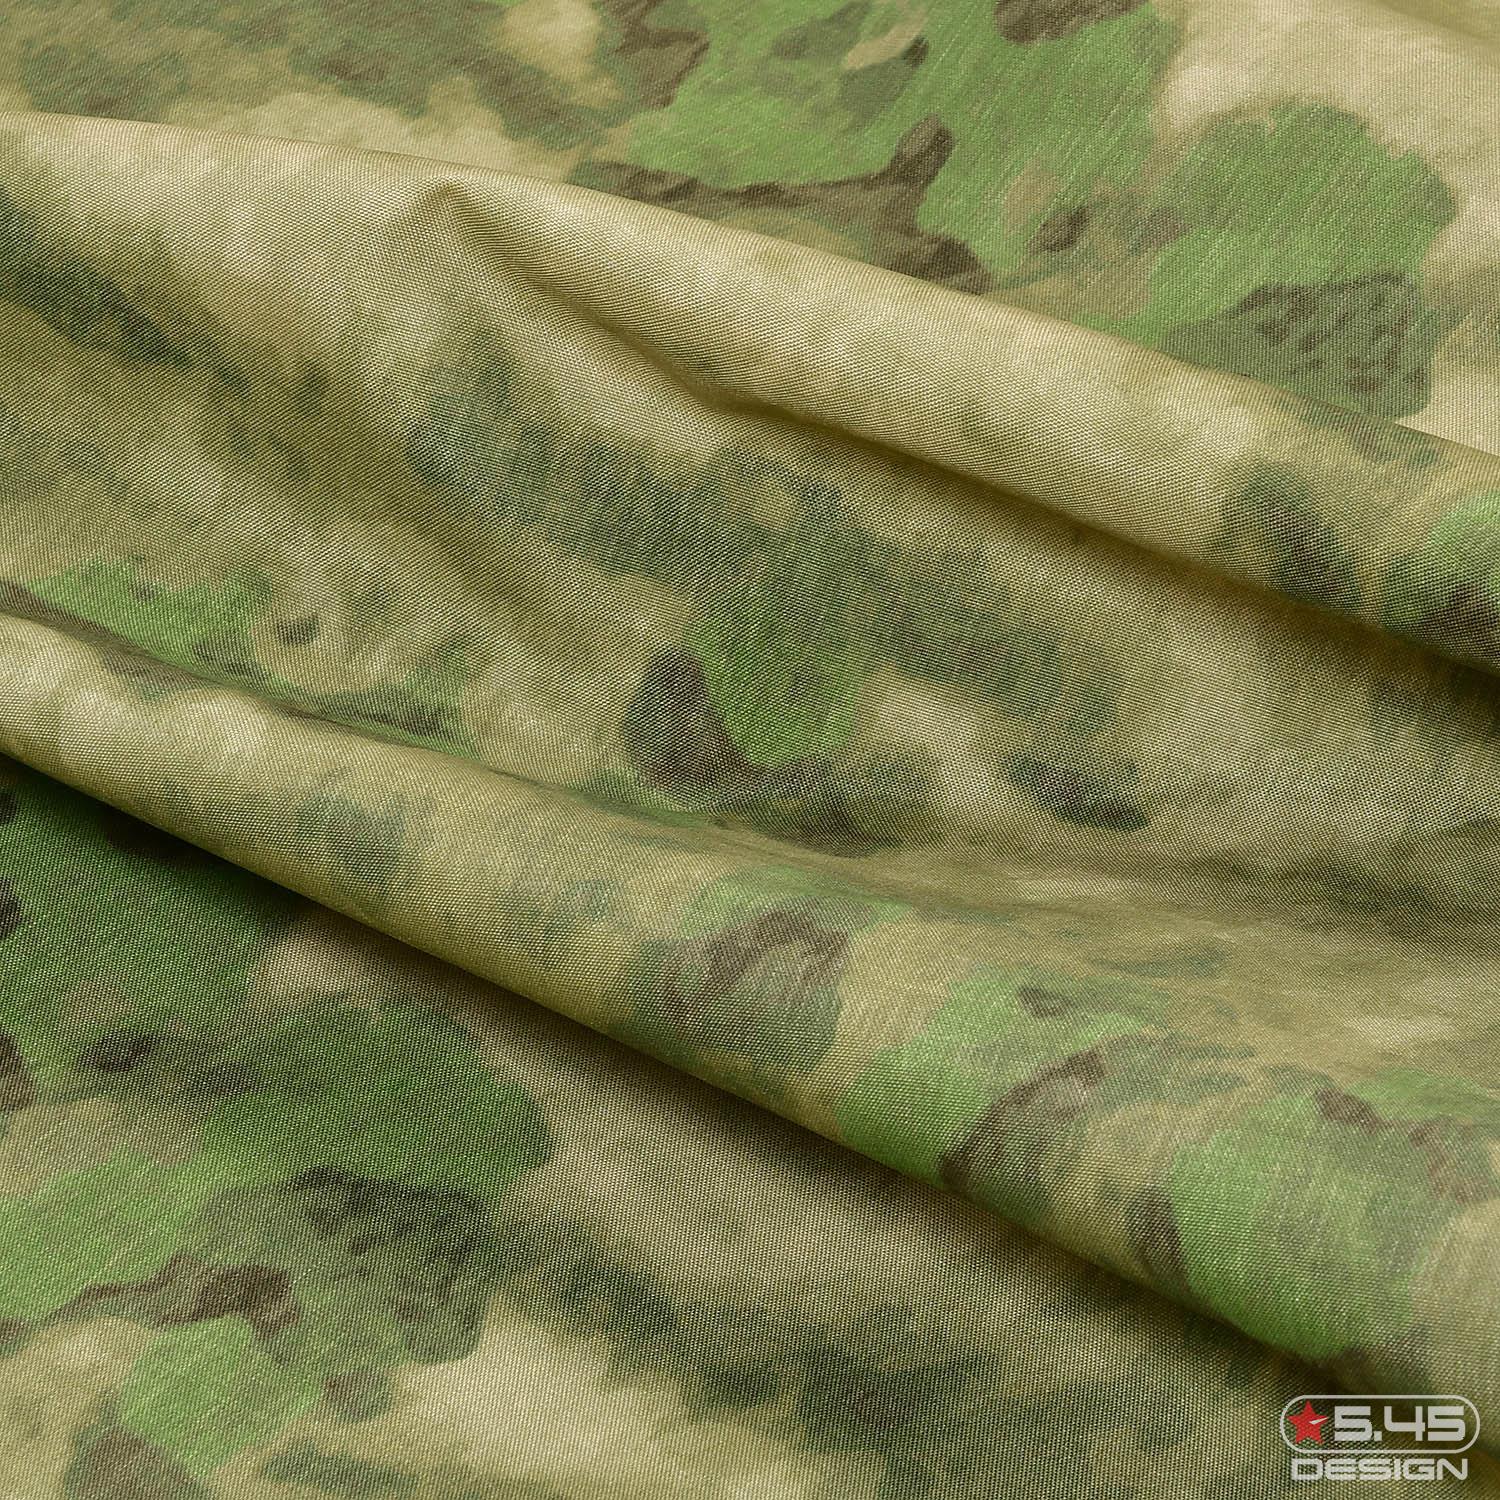 Aside from russia, what countries use A-TACS ? : r/camouflage